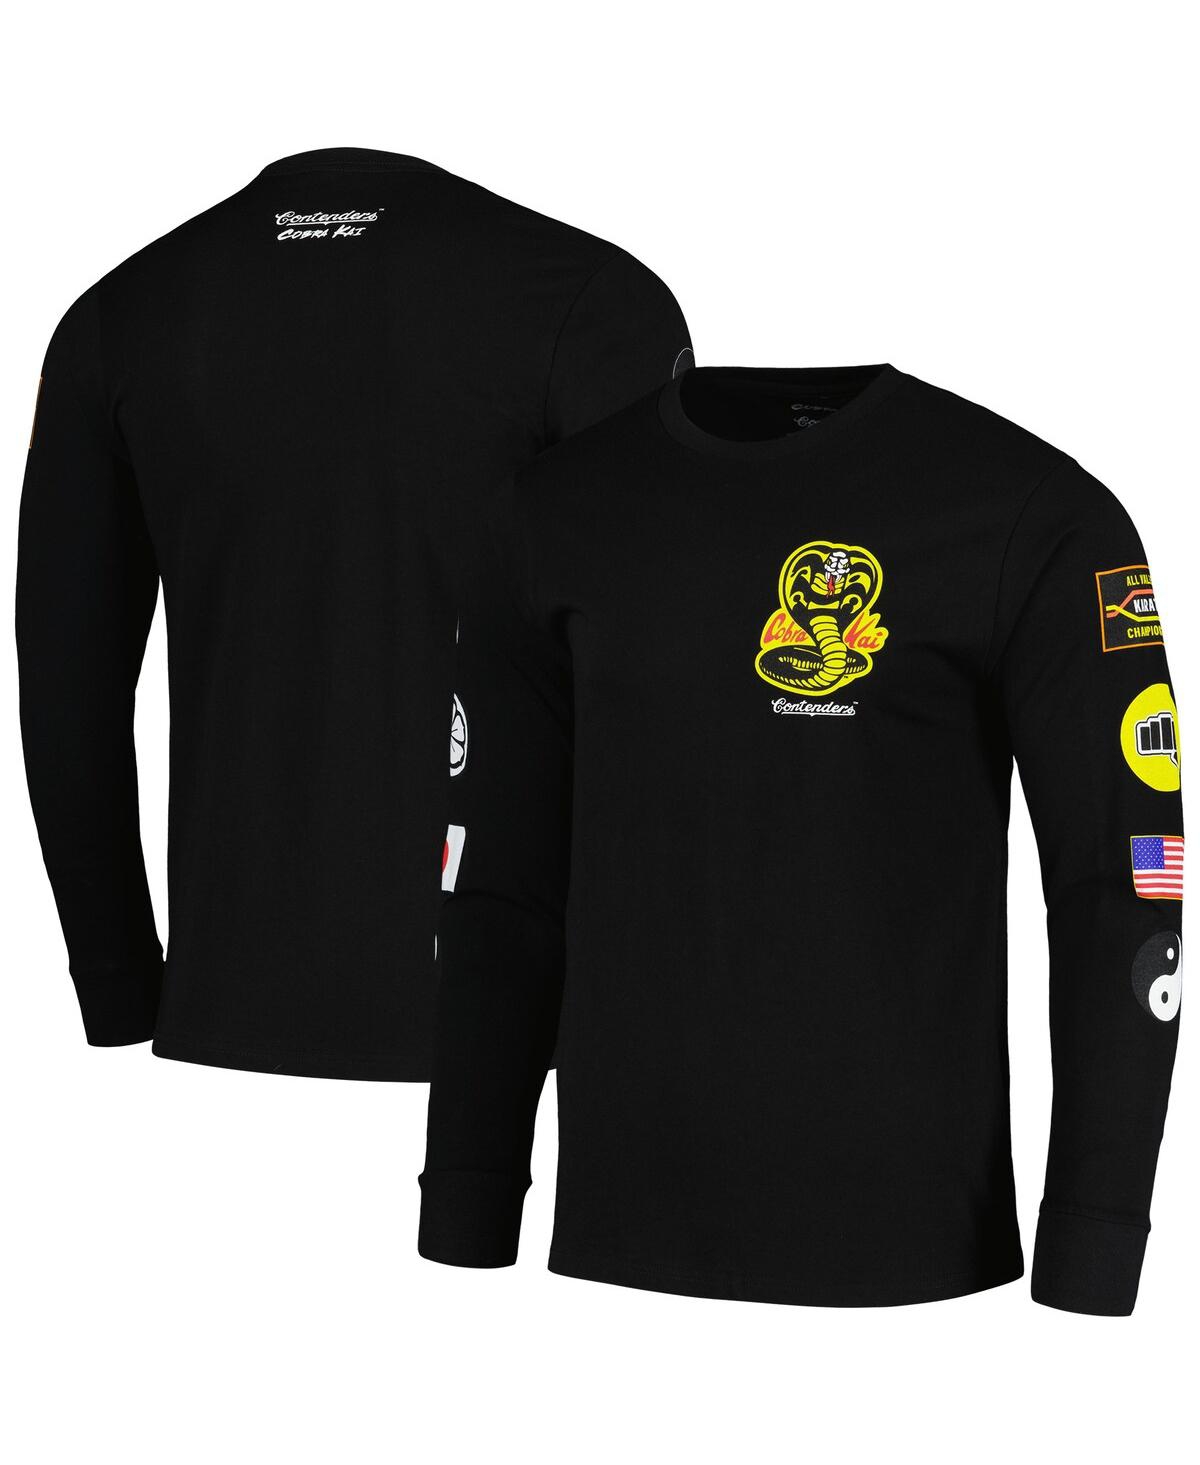 CONTENDERS CLOTHING MEN'S CONTENDERS CLOTHING BLACK COBRA KAI PATCHES LONG SLEEVE T-SHIRT